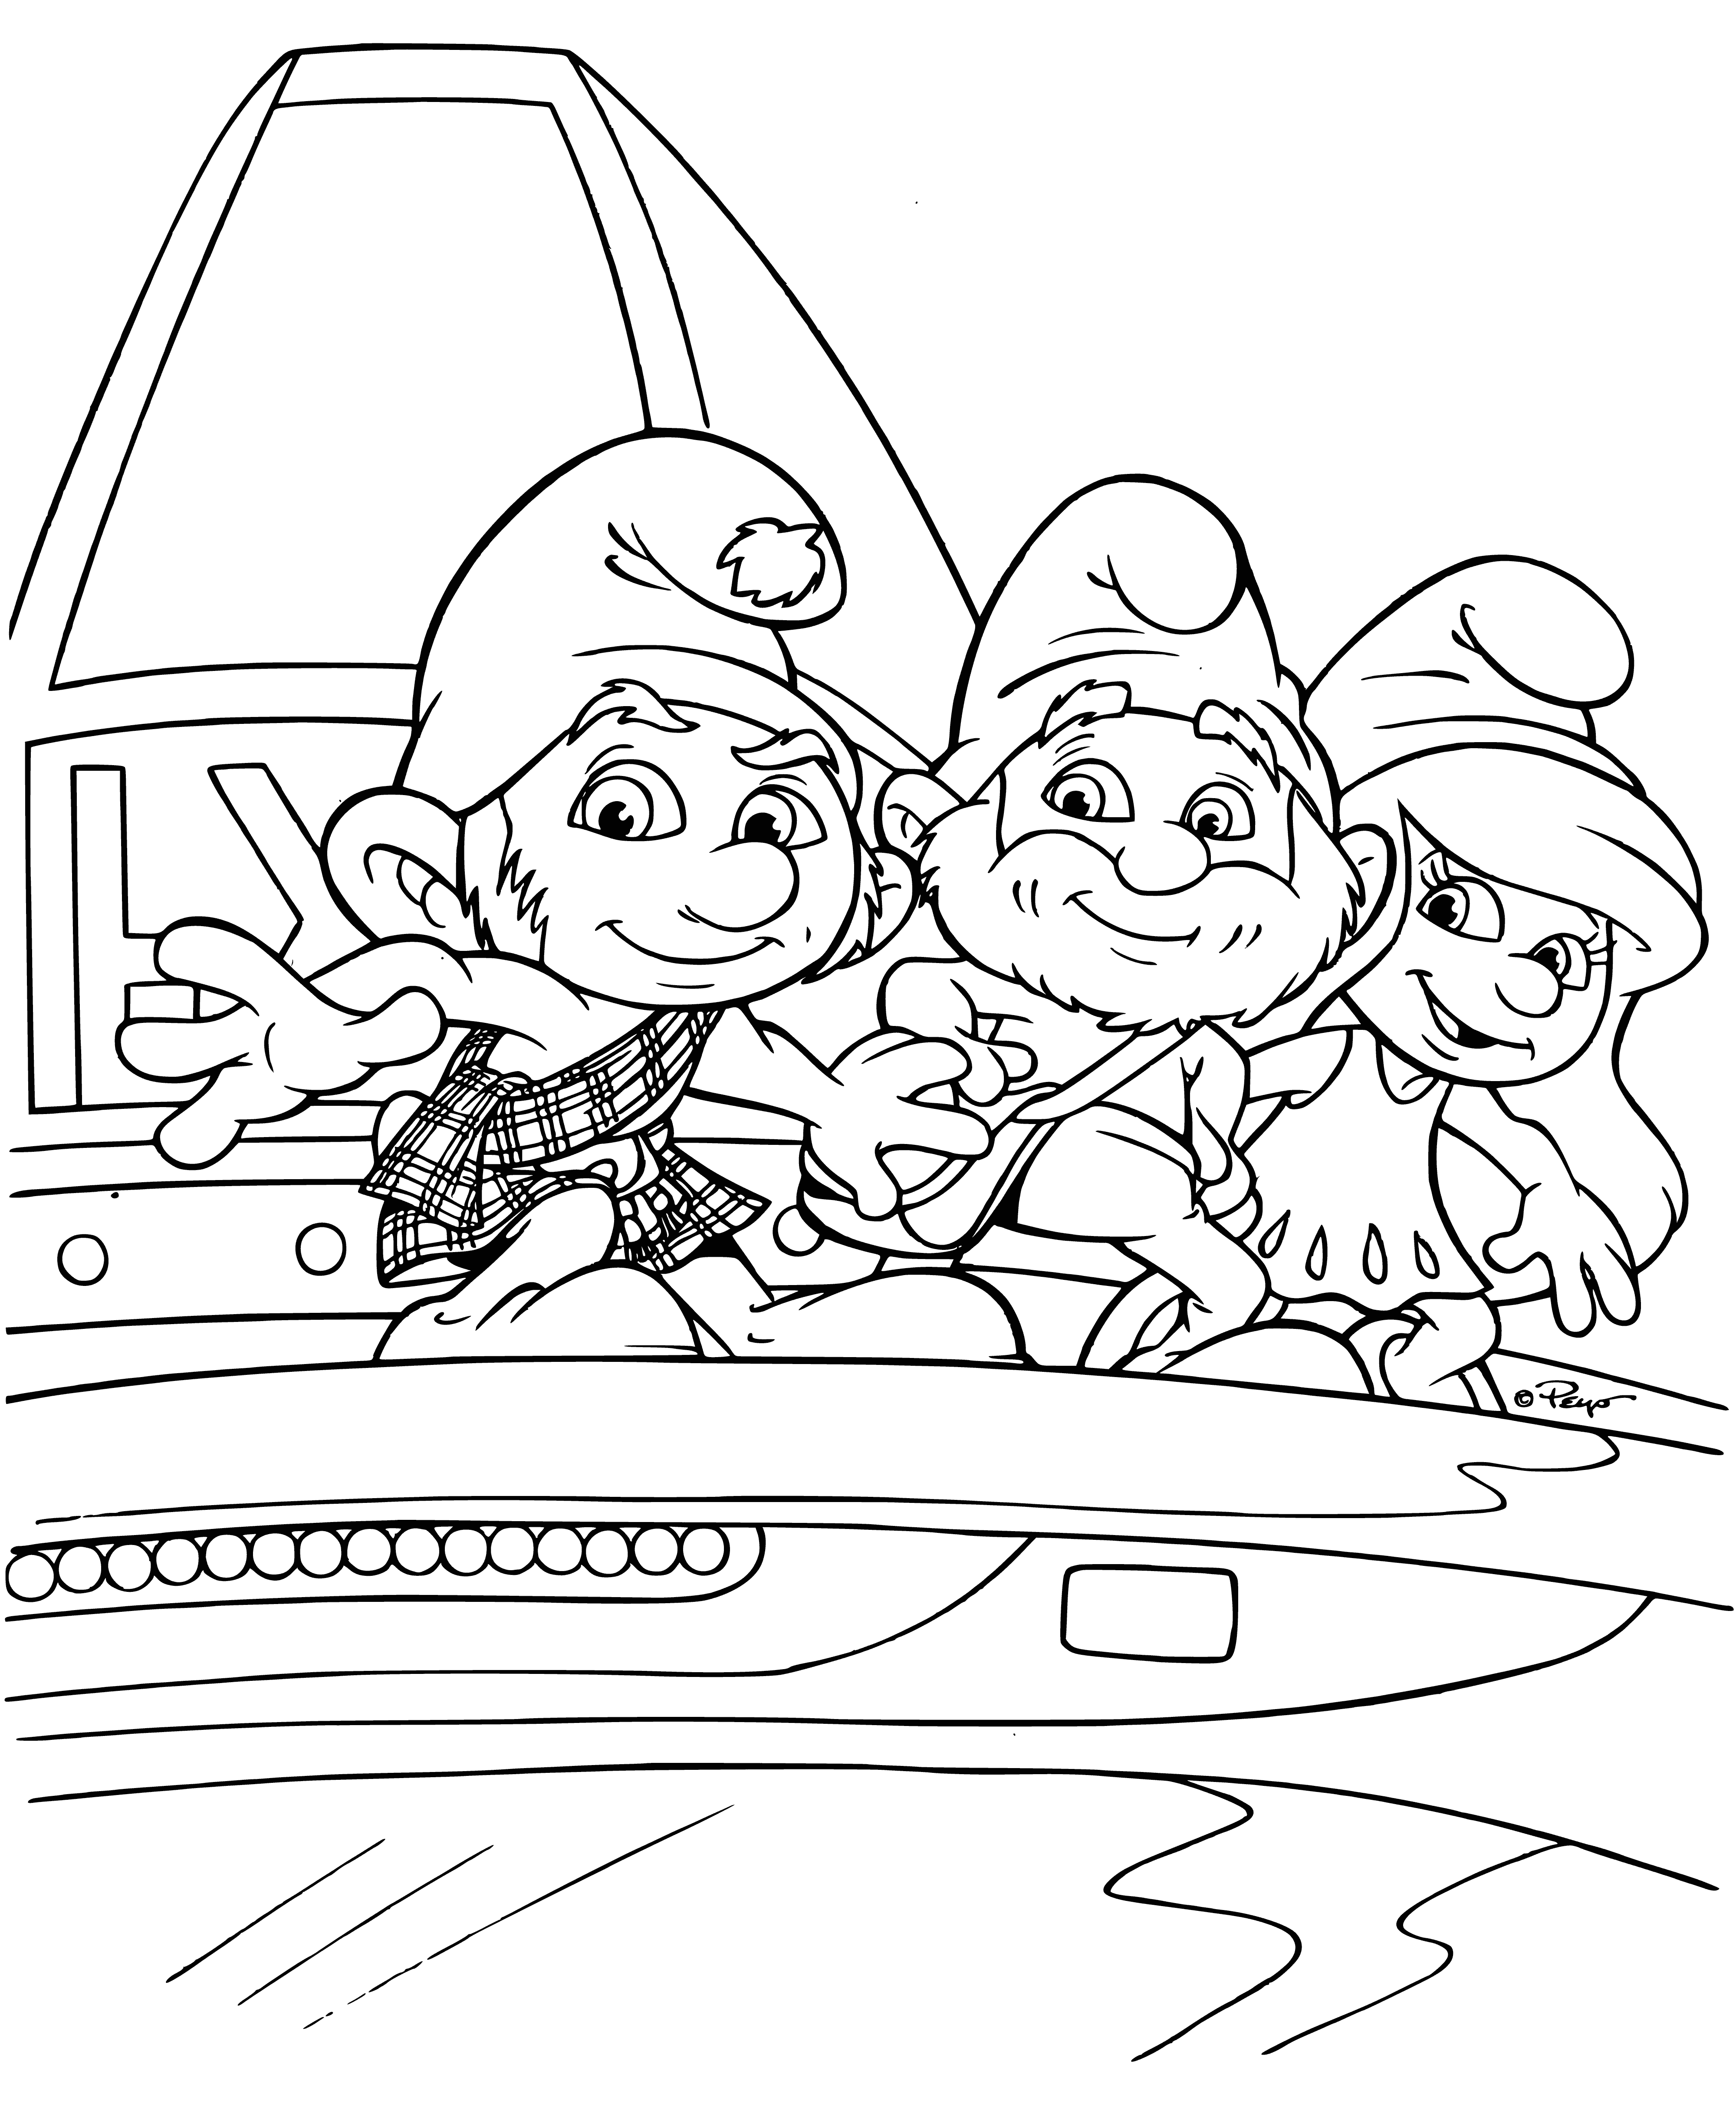 coloring page: The Smurfs in blue travel in the Smurfmobile with its white top & four white wheels. All smiles, they hold on tight. #Smurfs